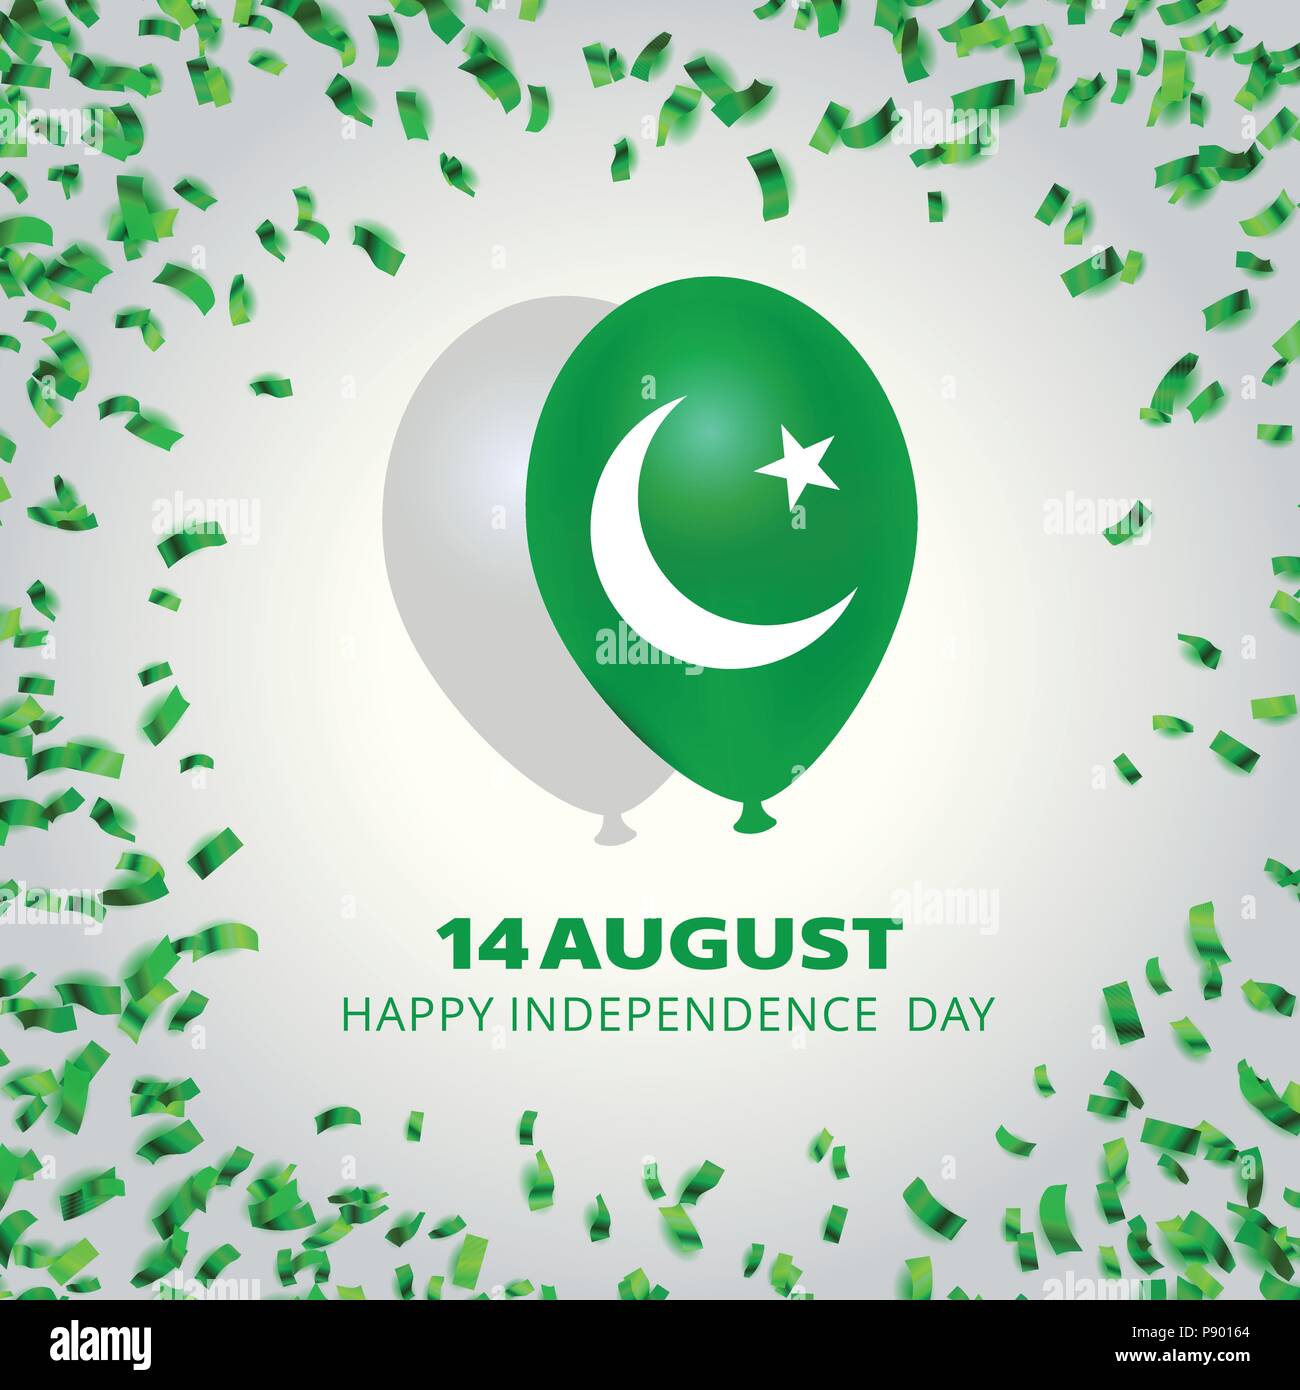 Pakistan's Flag balloons for Independence Day on white background ...